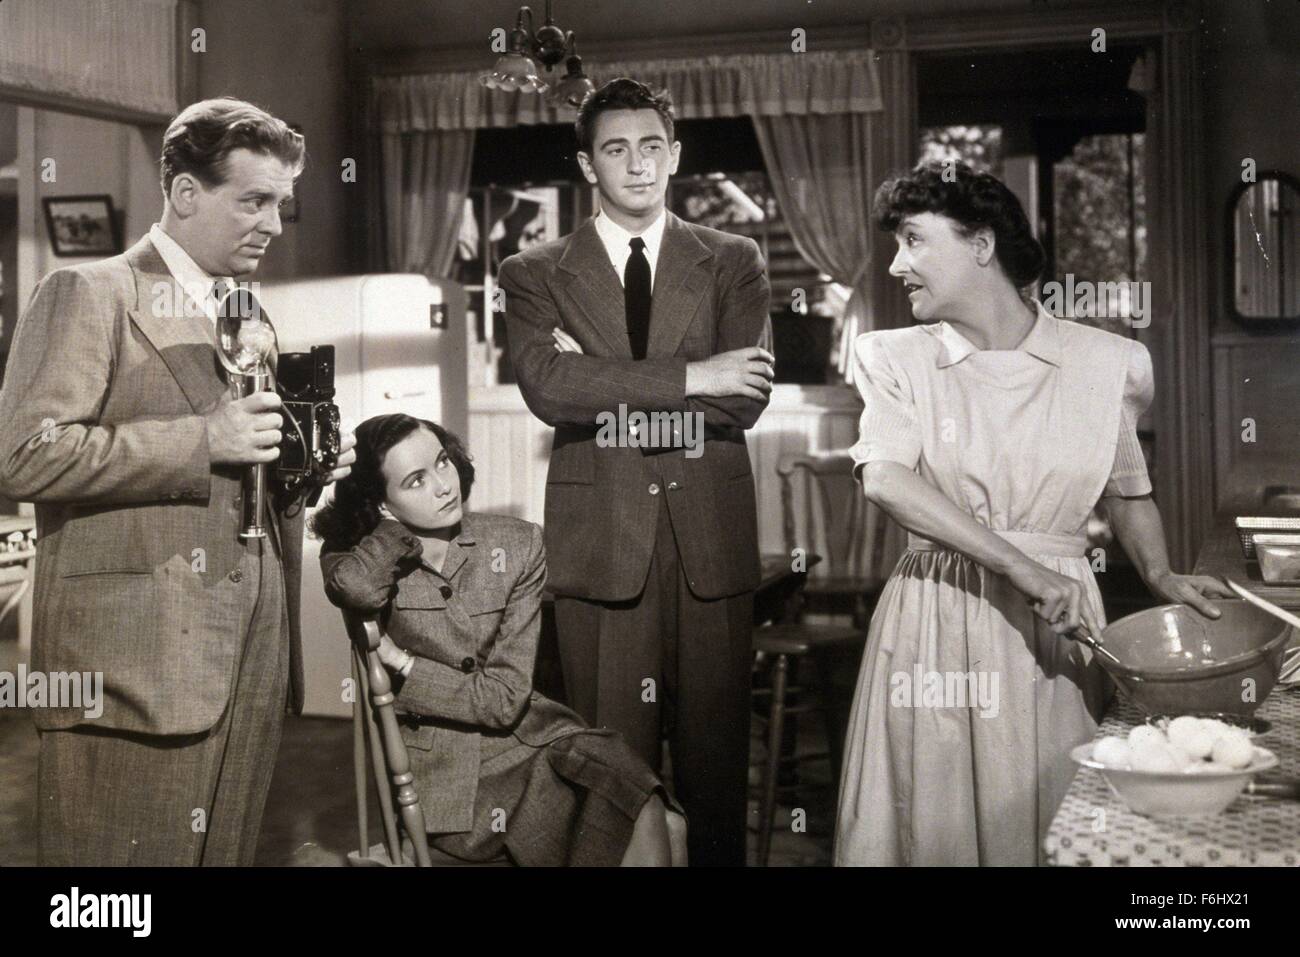 1943, Film Title: SHADOW OF A DOUBT, Director: ALFRED HITCHCOCK, Studio: SELZNICK, Pictured: MACDONALD CAREY, PATRICIA COLLINGE, WALLACE FORD, ALFRED HITCHCOCK. (Credit Image: SNAP) Stock Photo